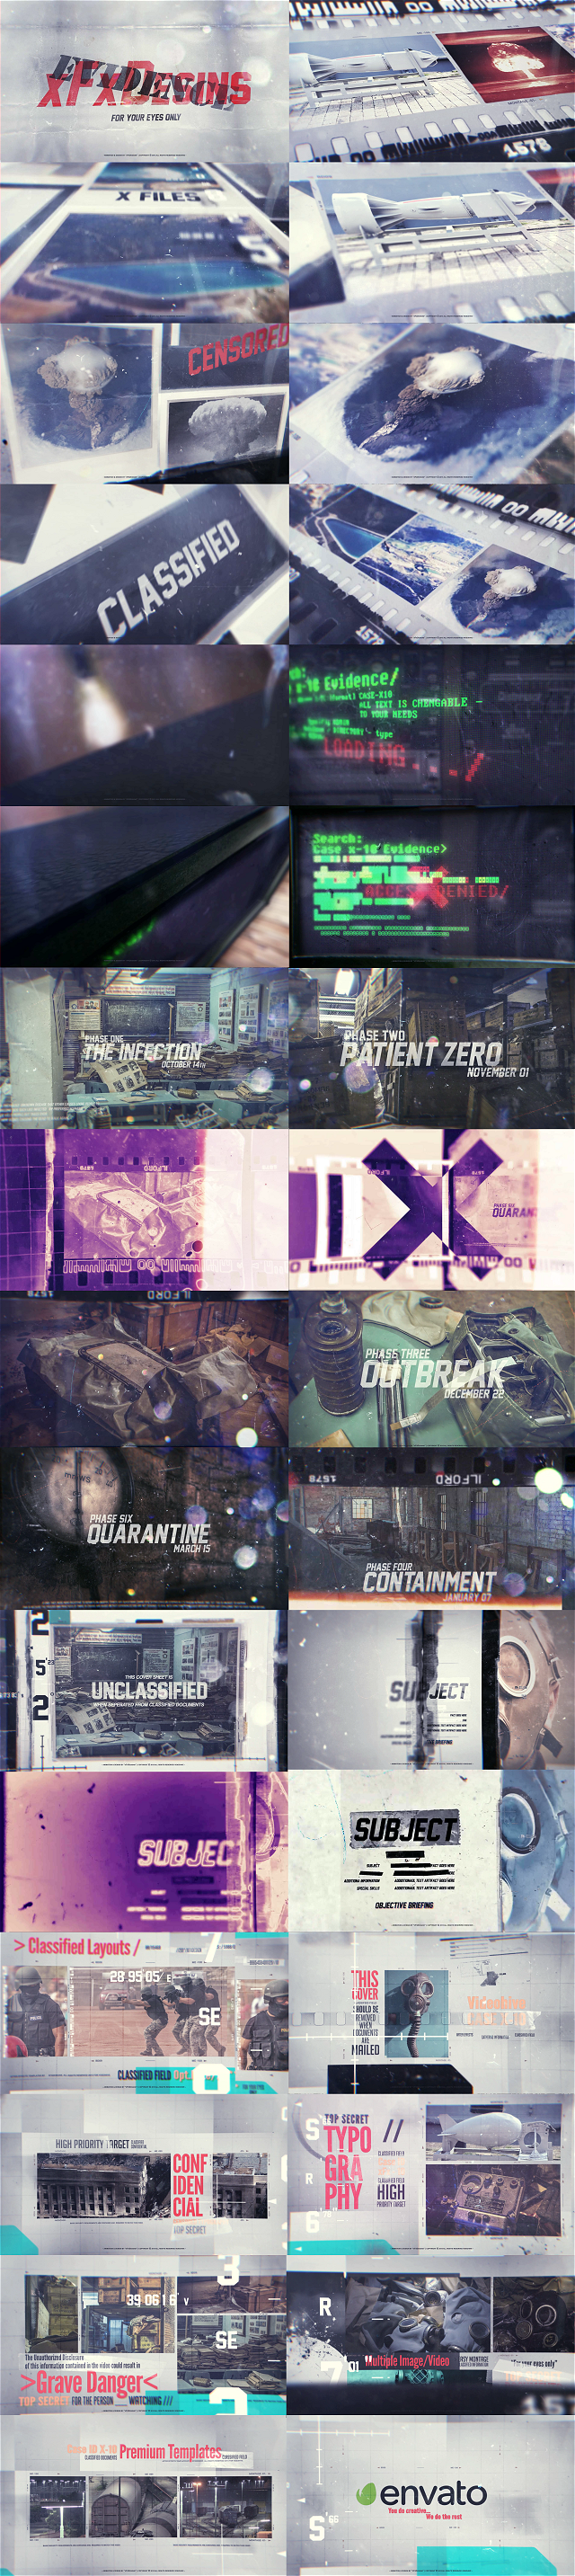 Videohive - The Investigation | Fallout Concept 14667195 - Free Download 